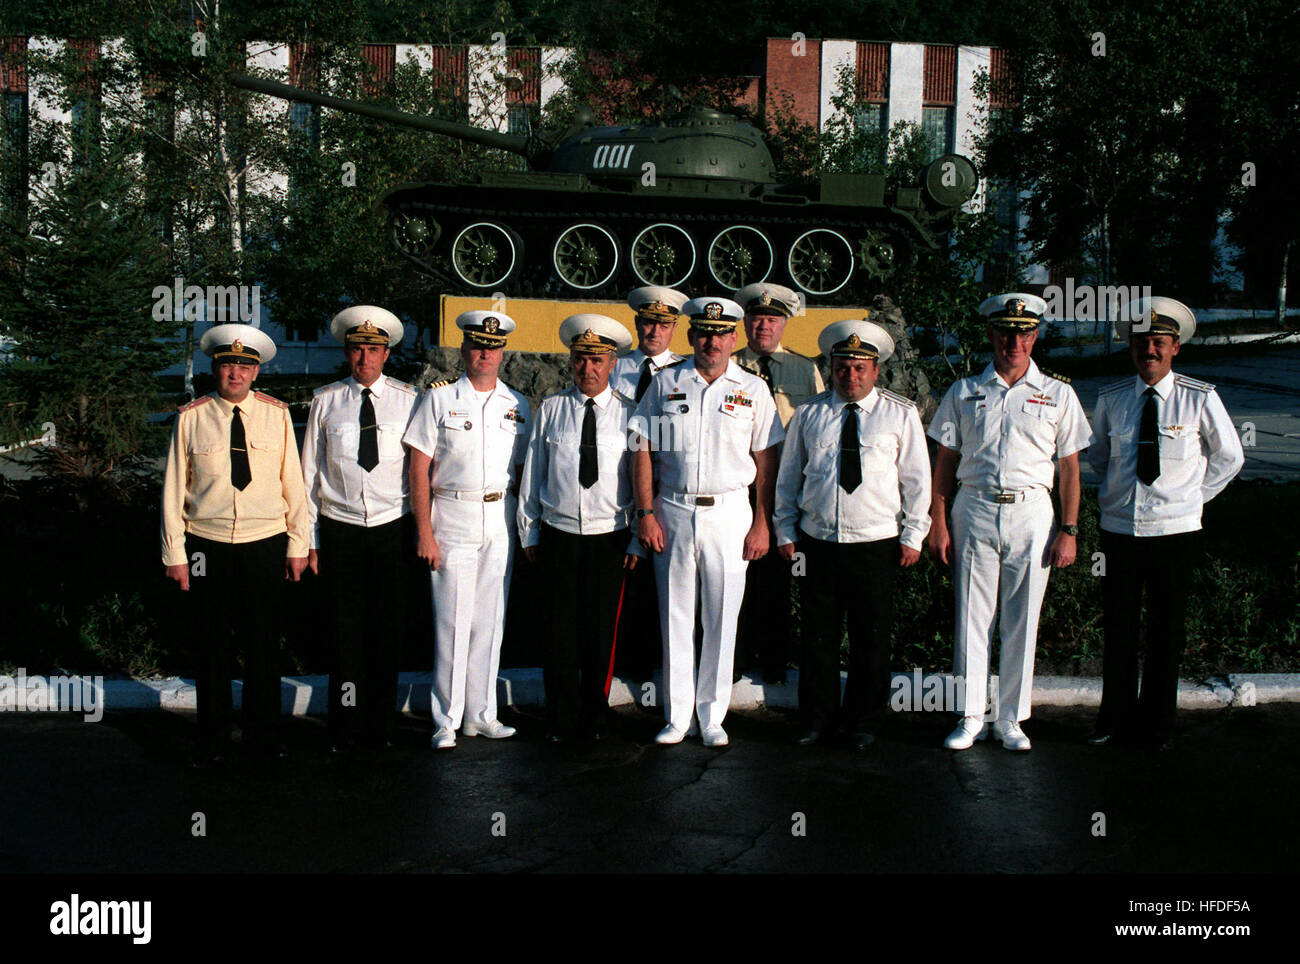 American and Soviet officers gather for a photograph in front of a T-54 tank at a Soviet navy service school during a visit to the city by two US Navy ships.  The guided missile cruiser USS PRINCETON (CG-59) and the guided missile frigate USS REUBEN JAMES (FFG 57) are in Vladivostok for four days as part of a goodwill exchange program. US and Soviet navy officers in front of a T-55 tank at the Soviet navy service school in Vladivostok Stock Photo